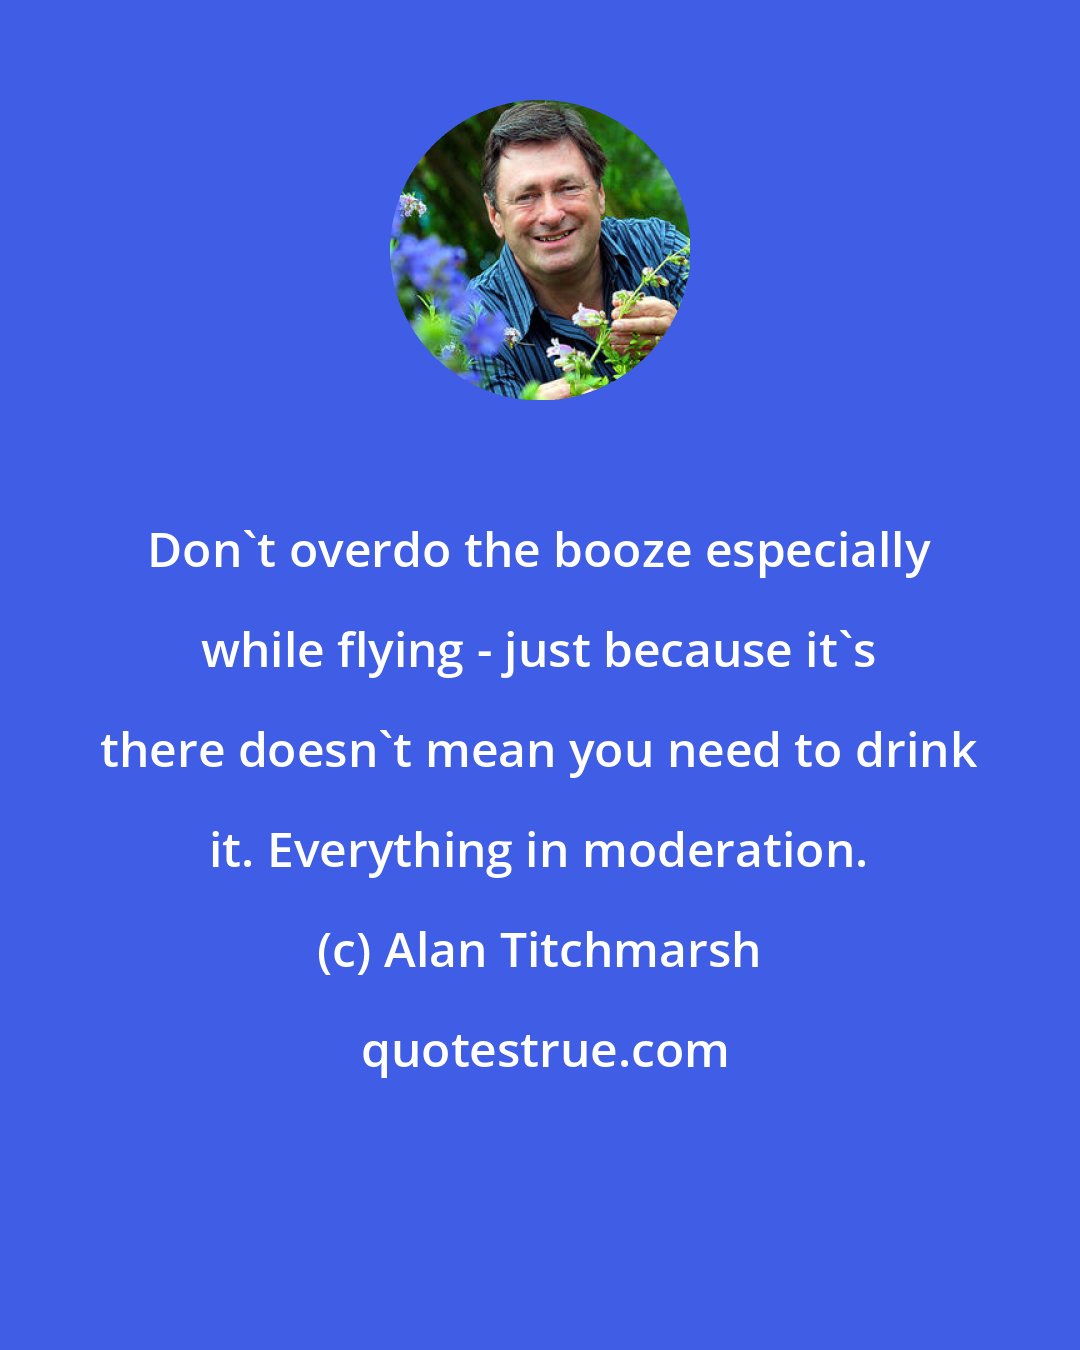 Alan Titchmarsh: Don't overdo the booze especially while flying - just because it's there doesn't mean you need to drink it. Everything in moderation.